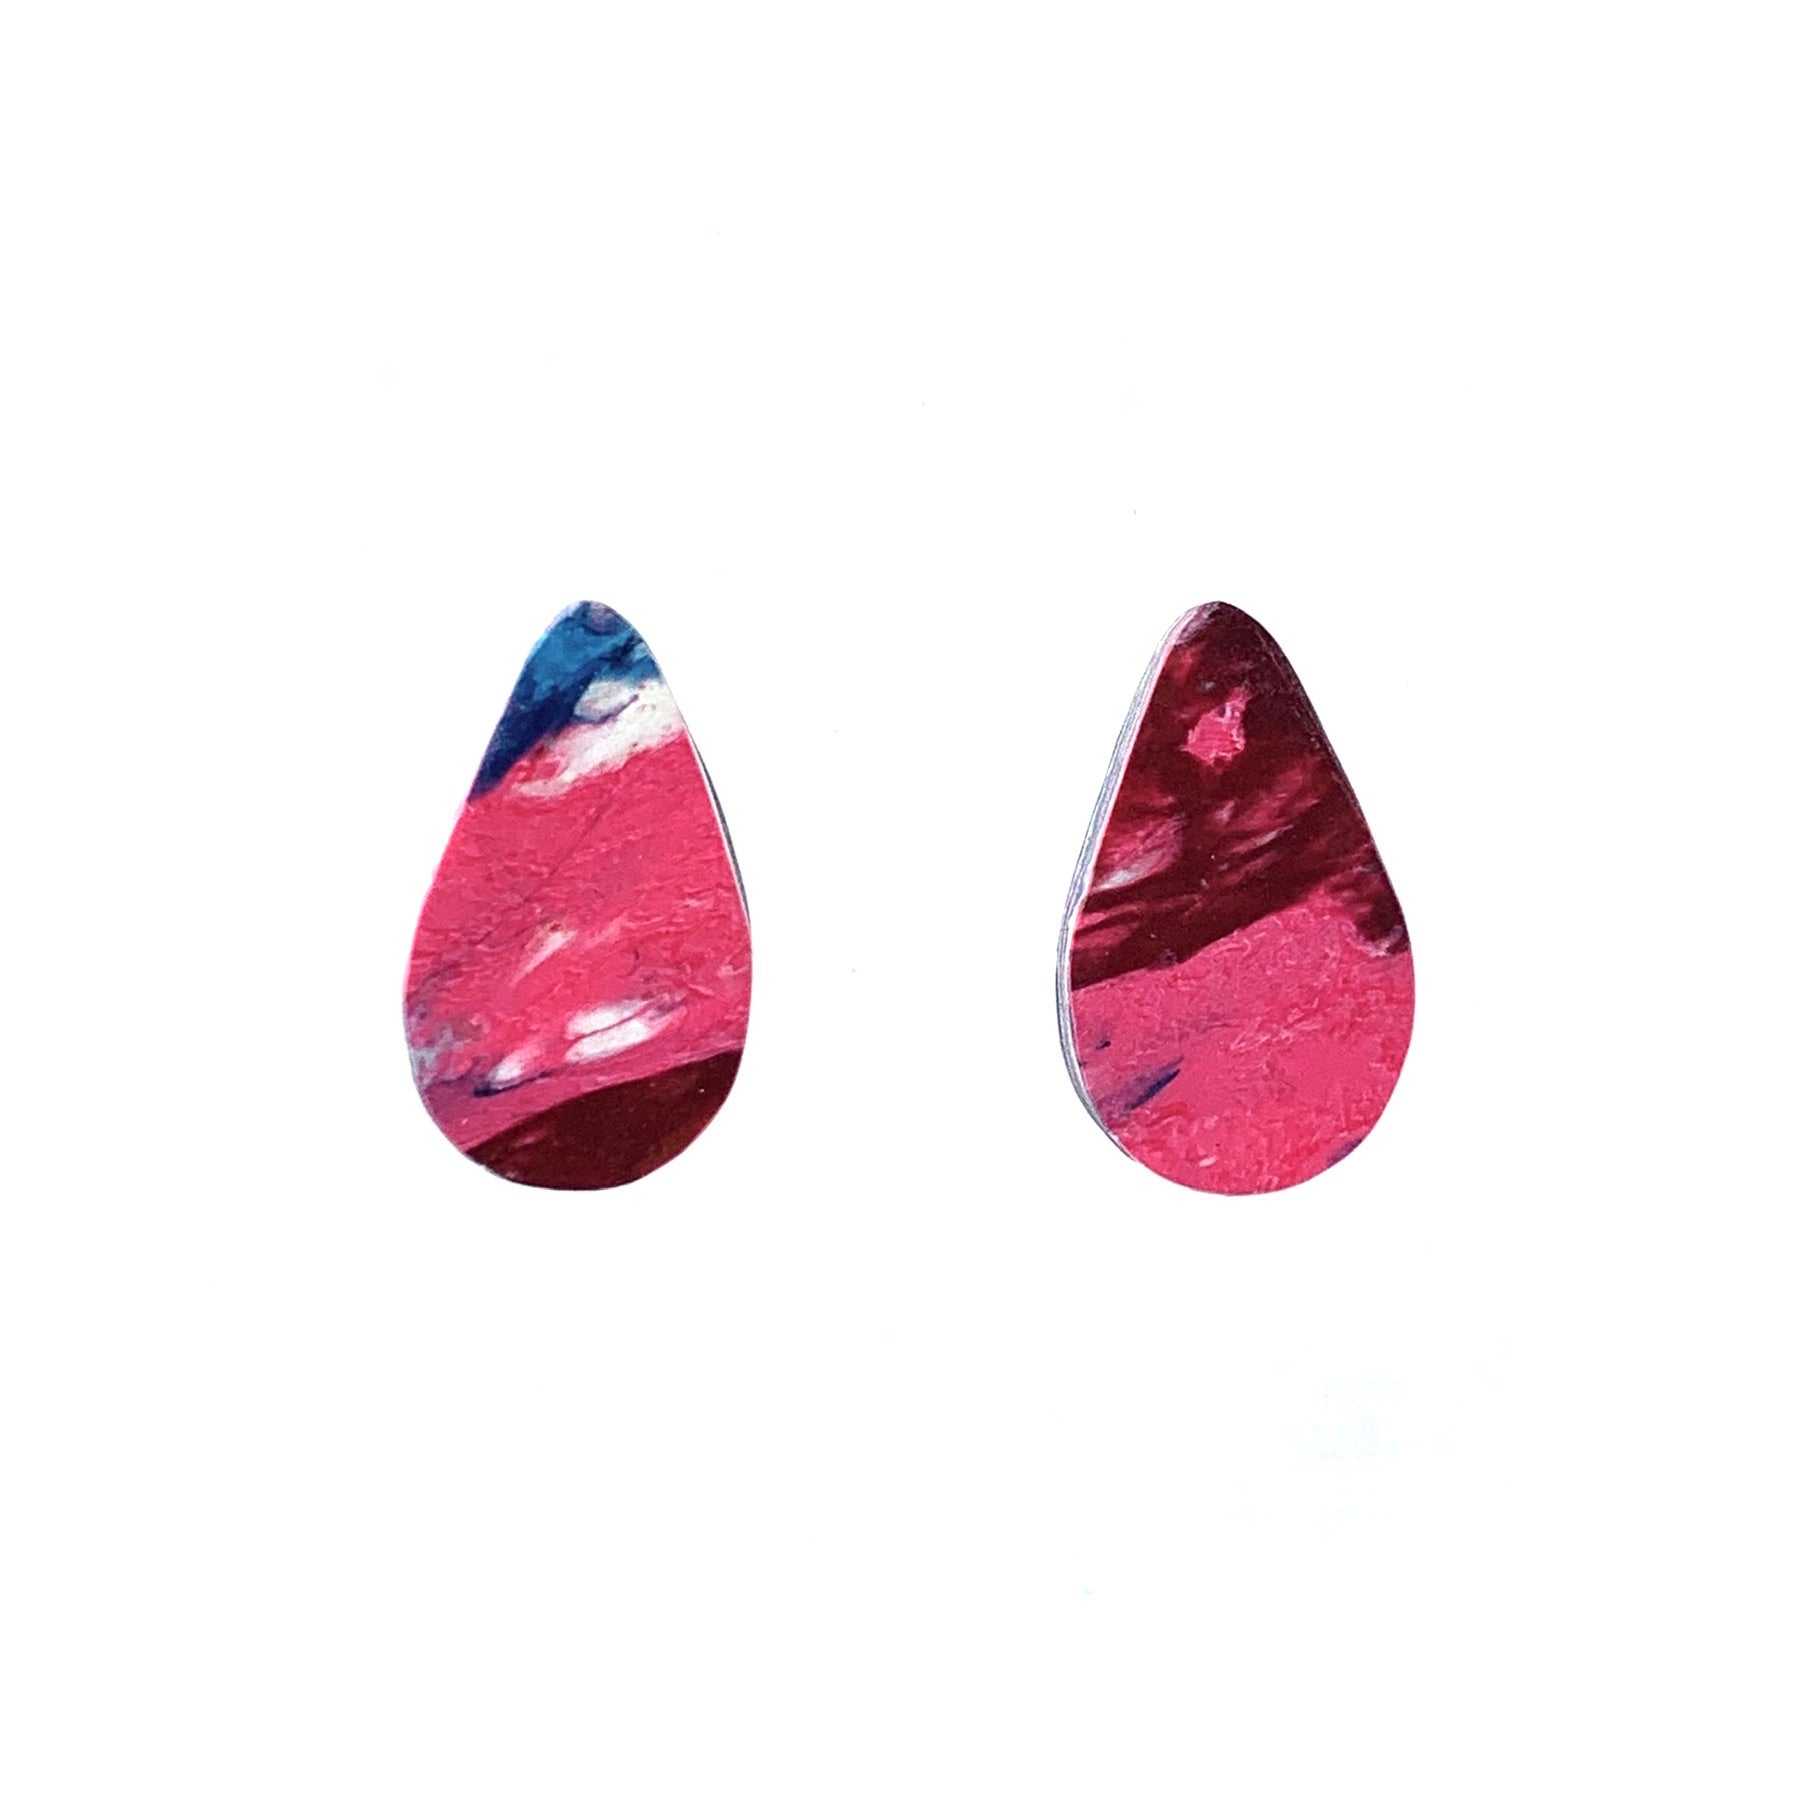 Pink teardrop earrings handmade in the UK sustainable eco friendly gift for her